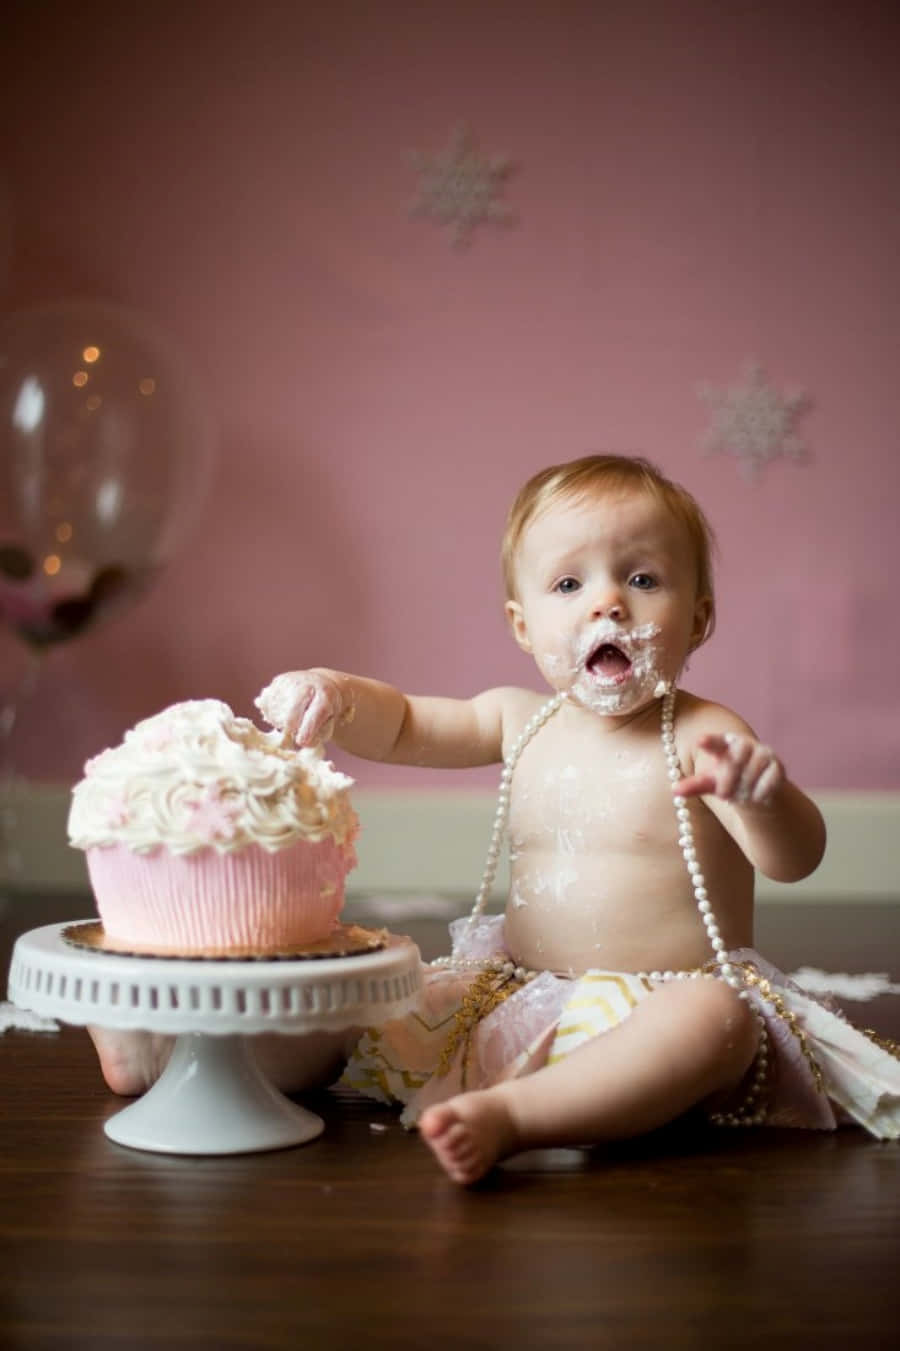 A Baby Girl Is Eating A Cupcake In Front Of A Pink Background